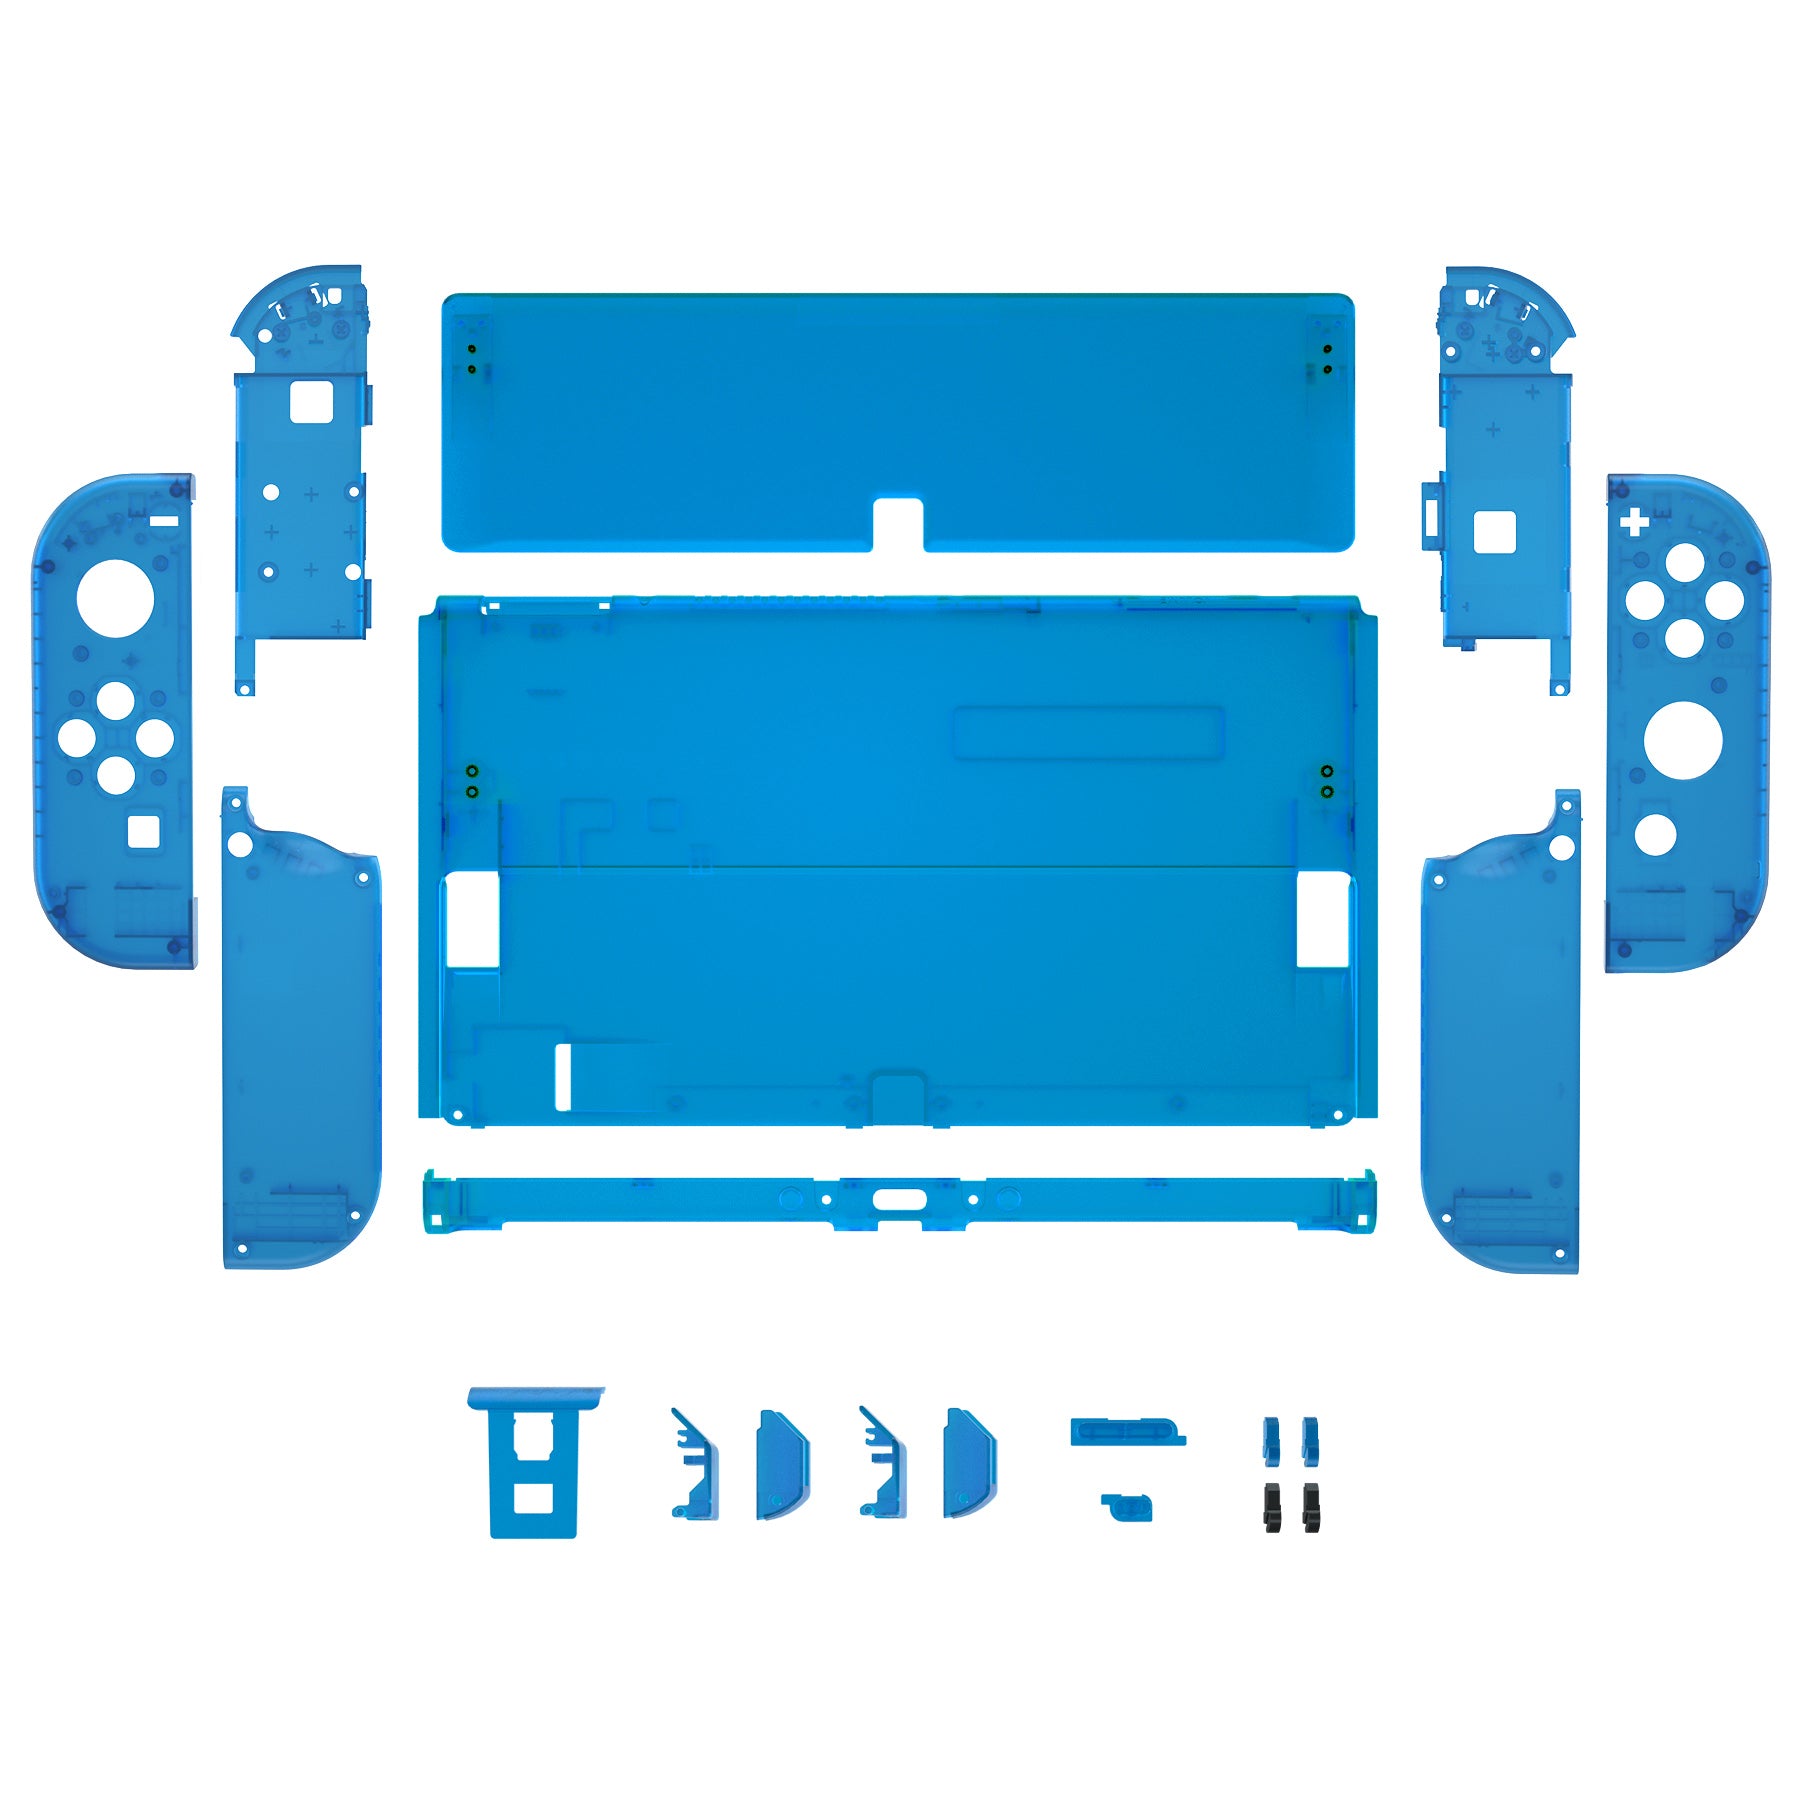 eXtremeRate Retail Clear Blue Custom Full Set Shell for Nintendo Switch OLED, DIY Replacement Console Back Plate & Kickstand, NS Joycon Handheld Controller Housing with Colorful Buttons for Nintendo Switch OLED - QNSOM5006